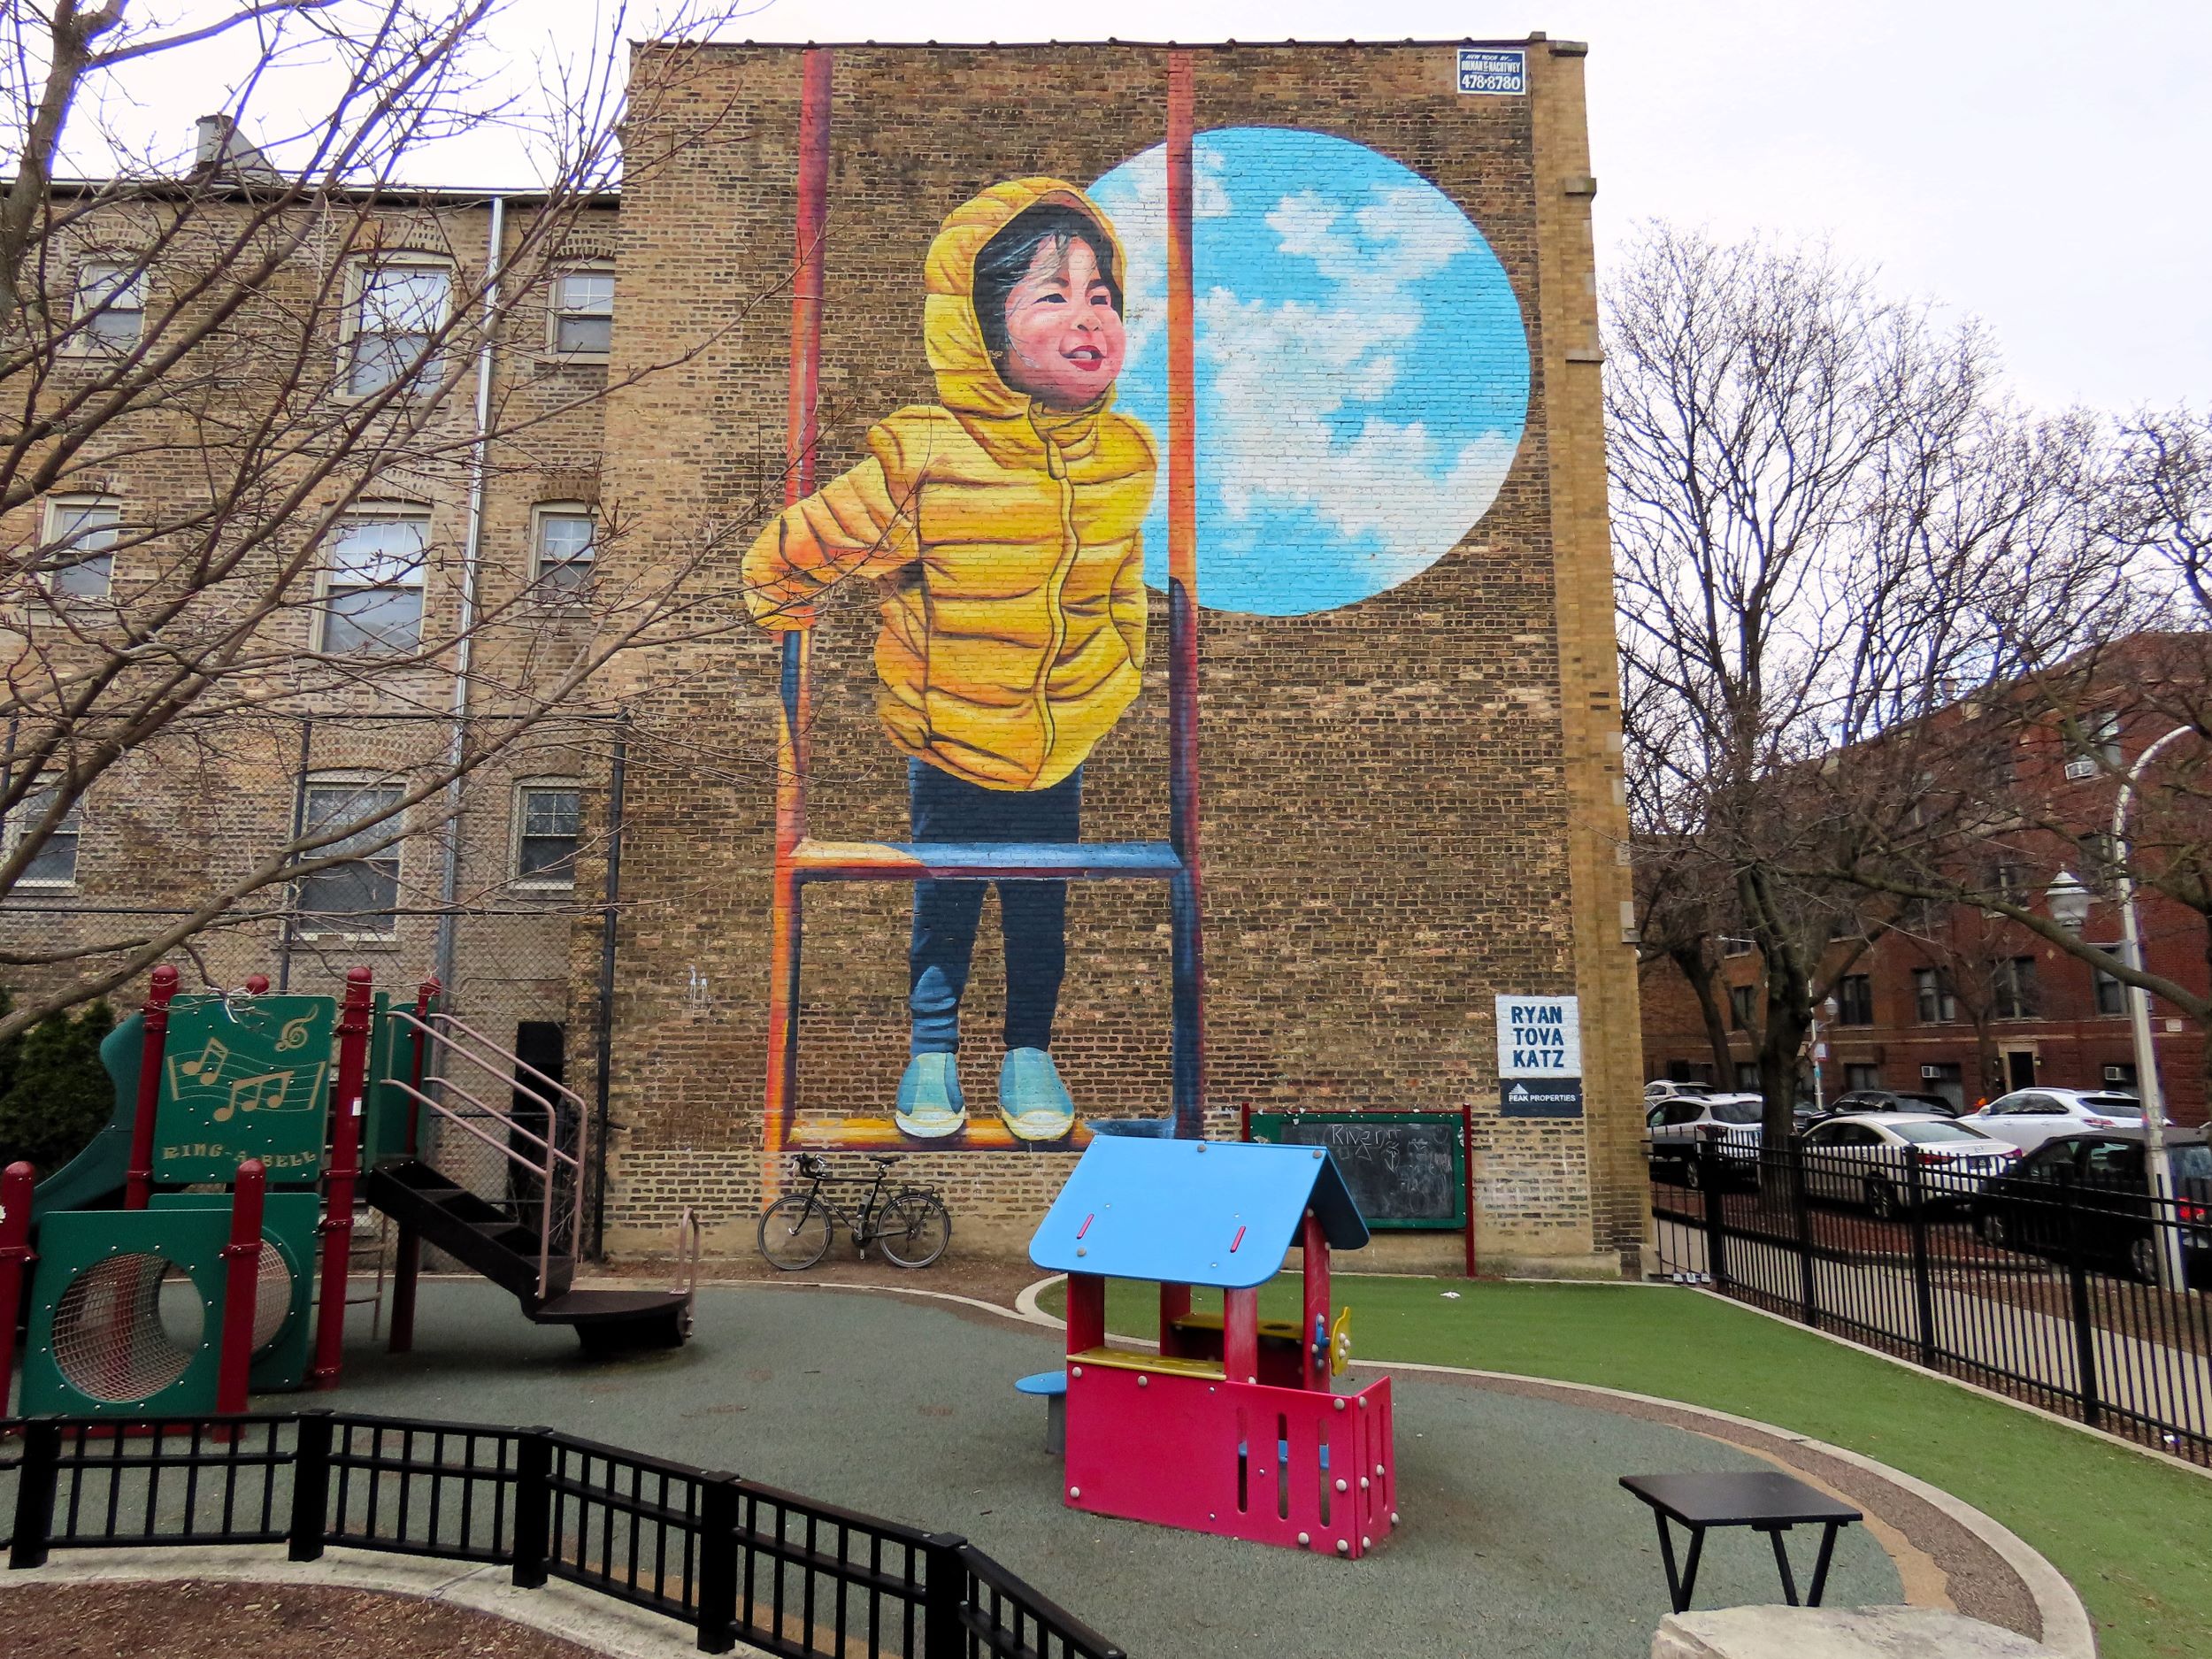 In a playground a tour bicycle is leaning on a brick wall below a three story high mural of a back haired child in a yellow jacket playing on a swing in front of the Earth.